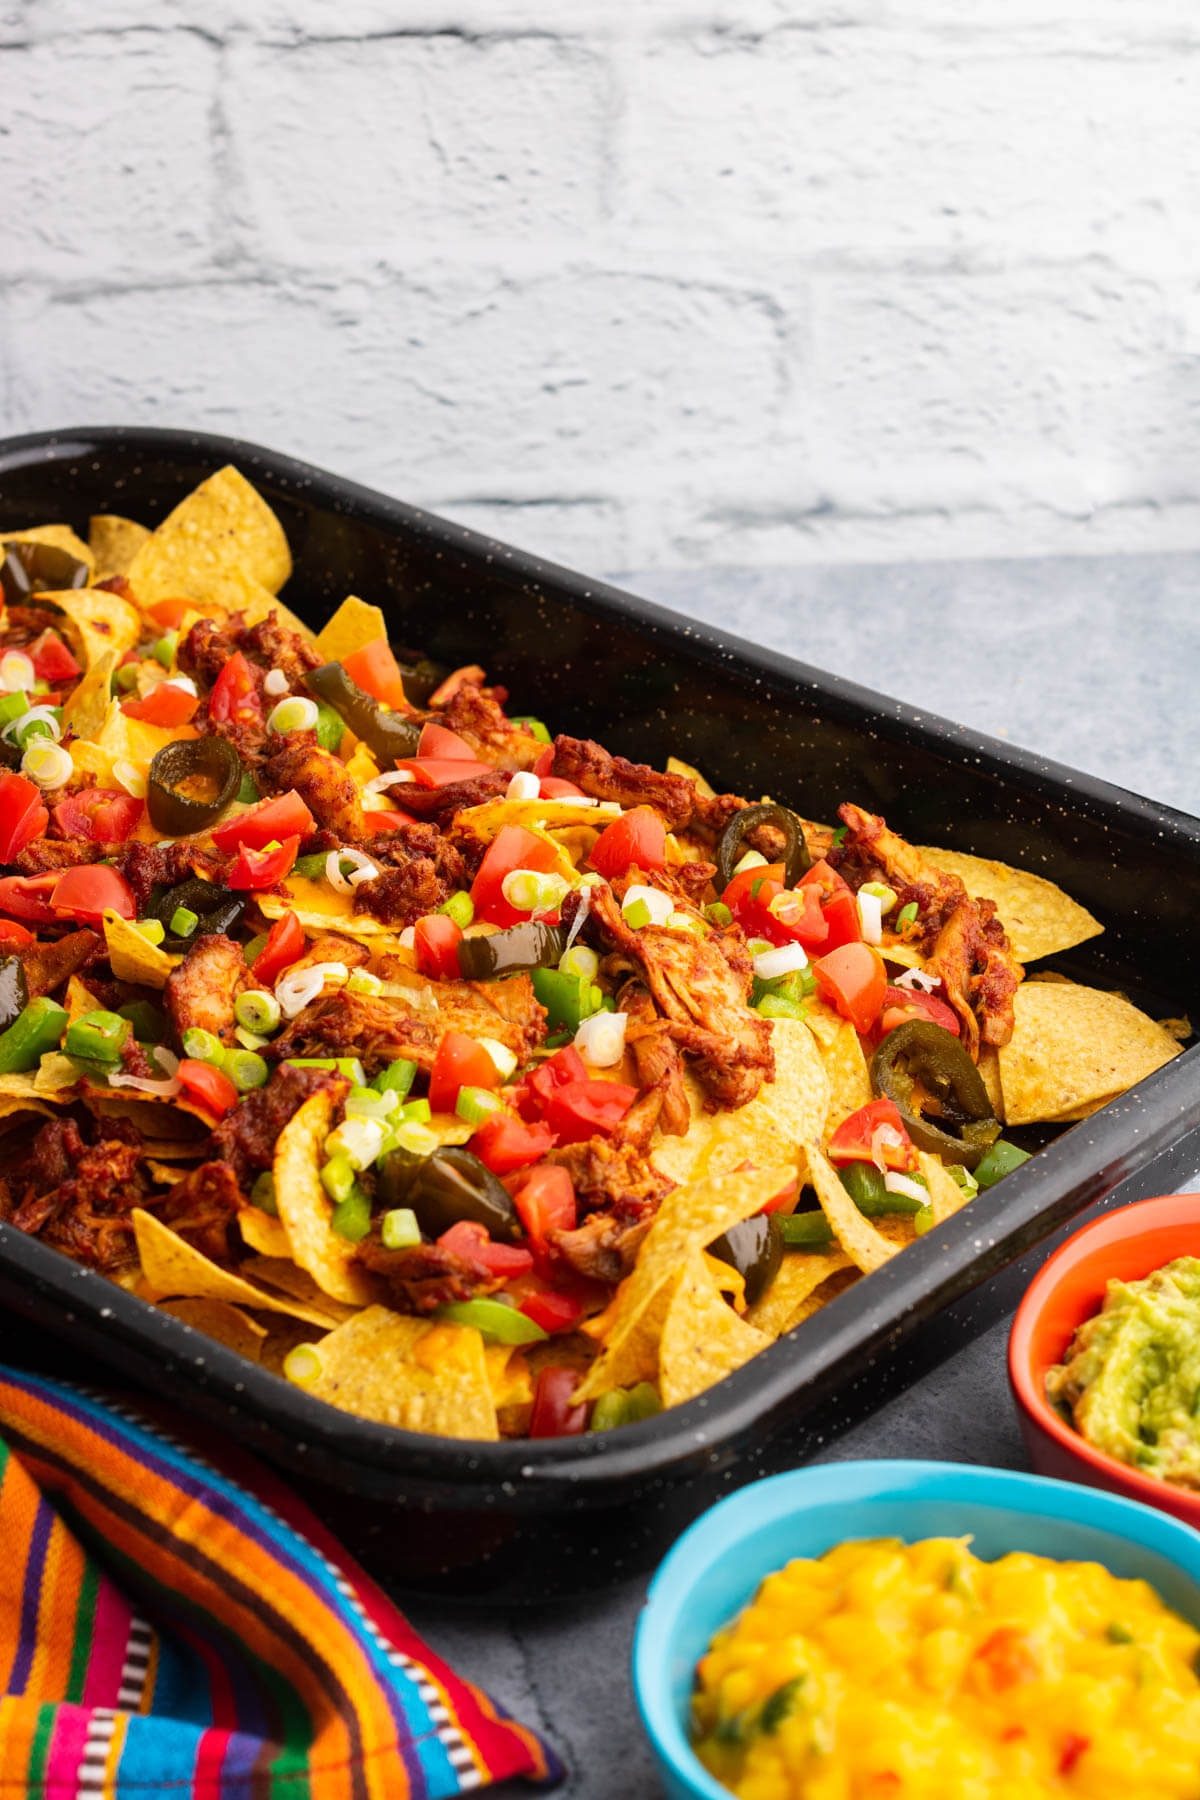 A colourful tray of BBQ Chicken nachos with two small side dishes of mango salsa and guacamole.